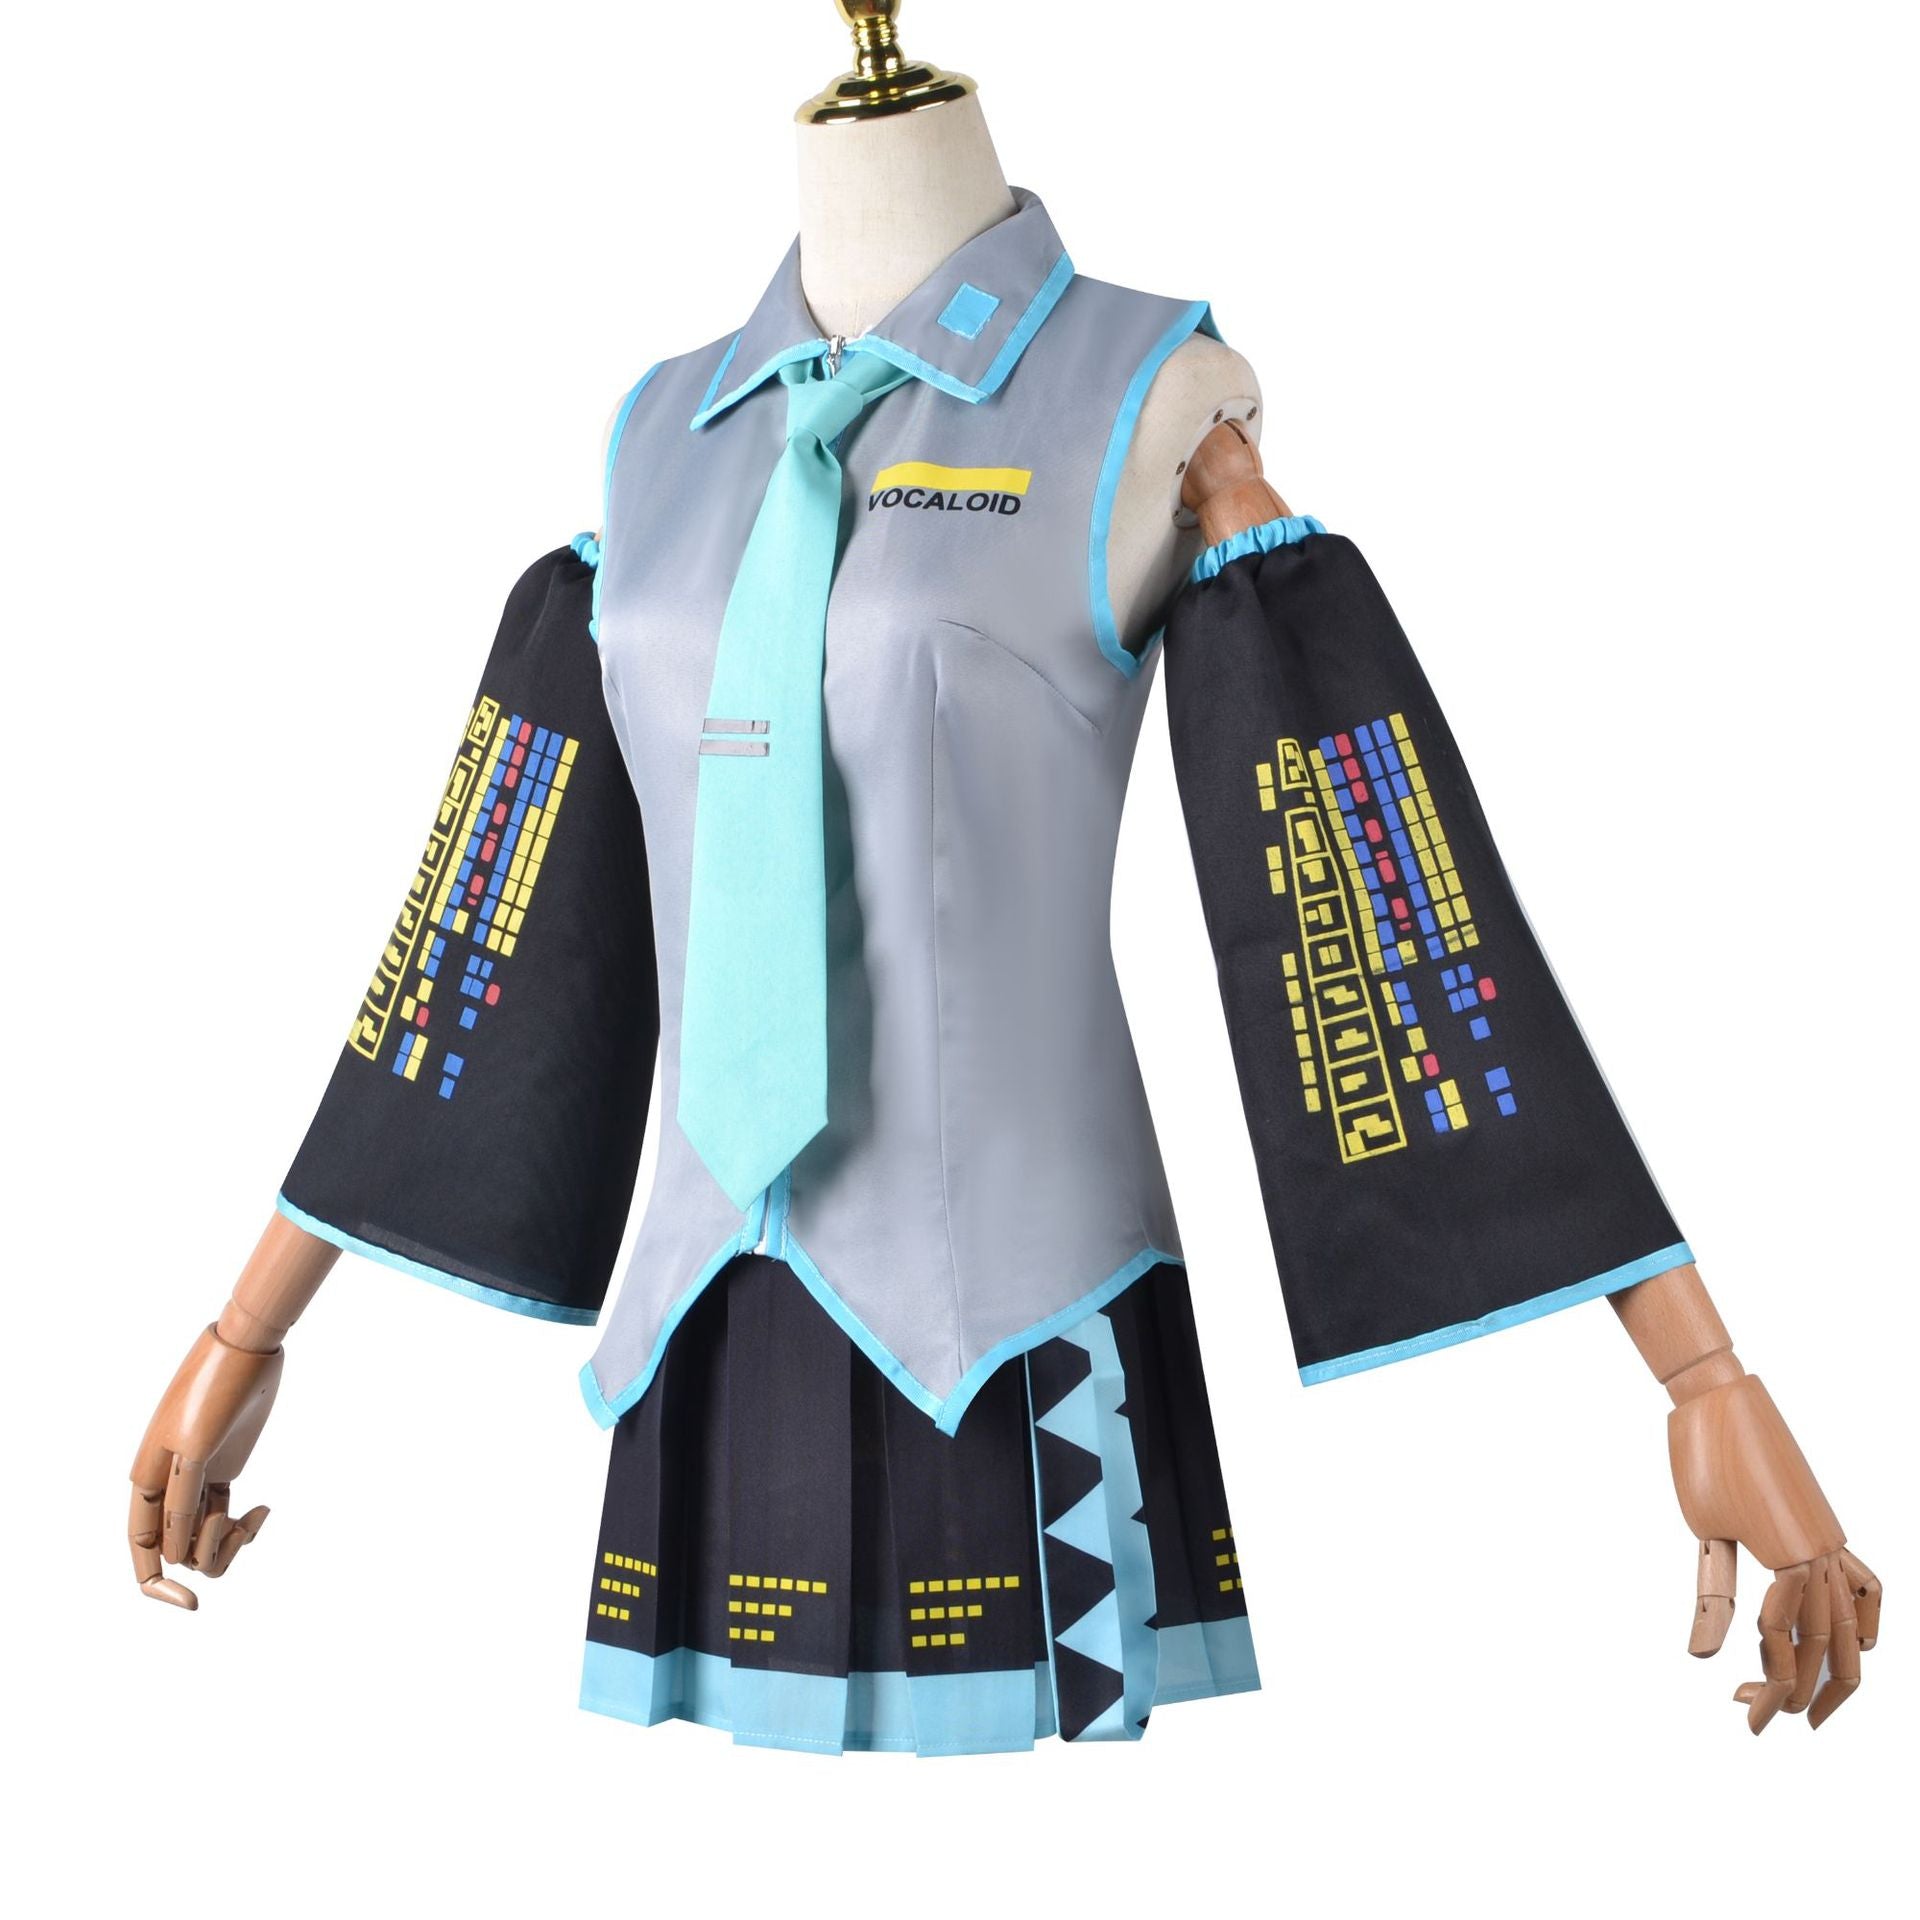 Rulercosplay Vocaloid Miku Large Size Cosplay Costume